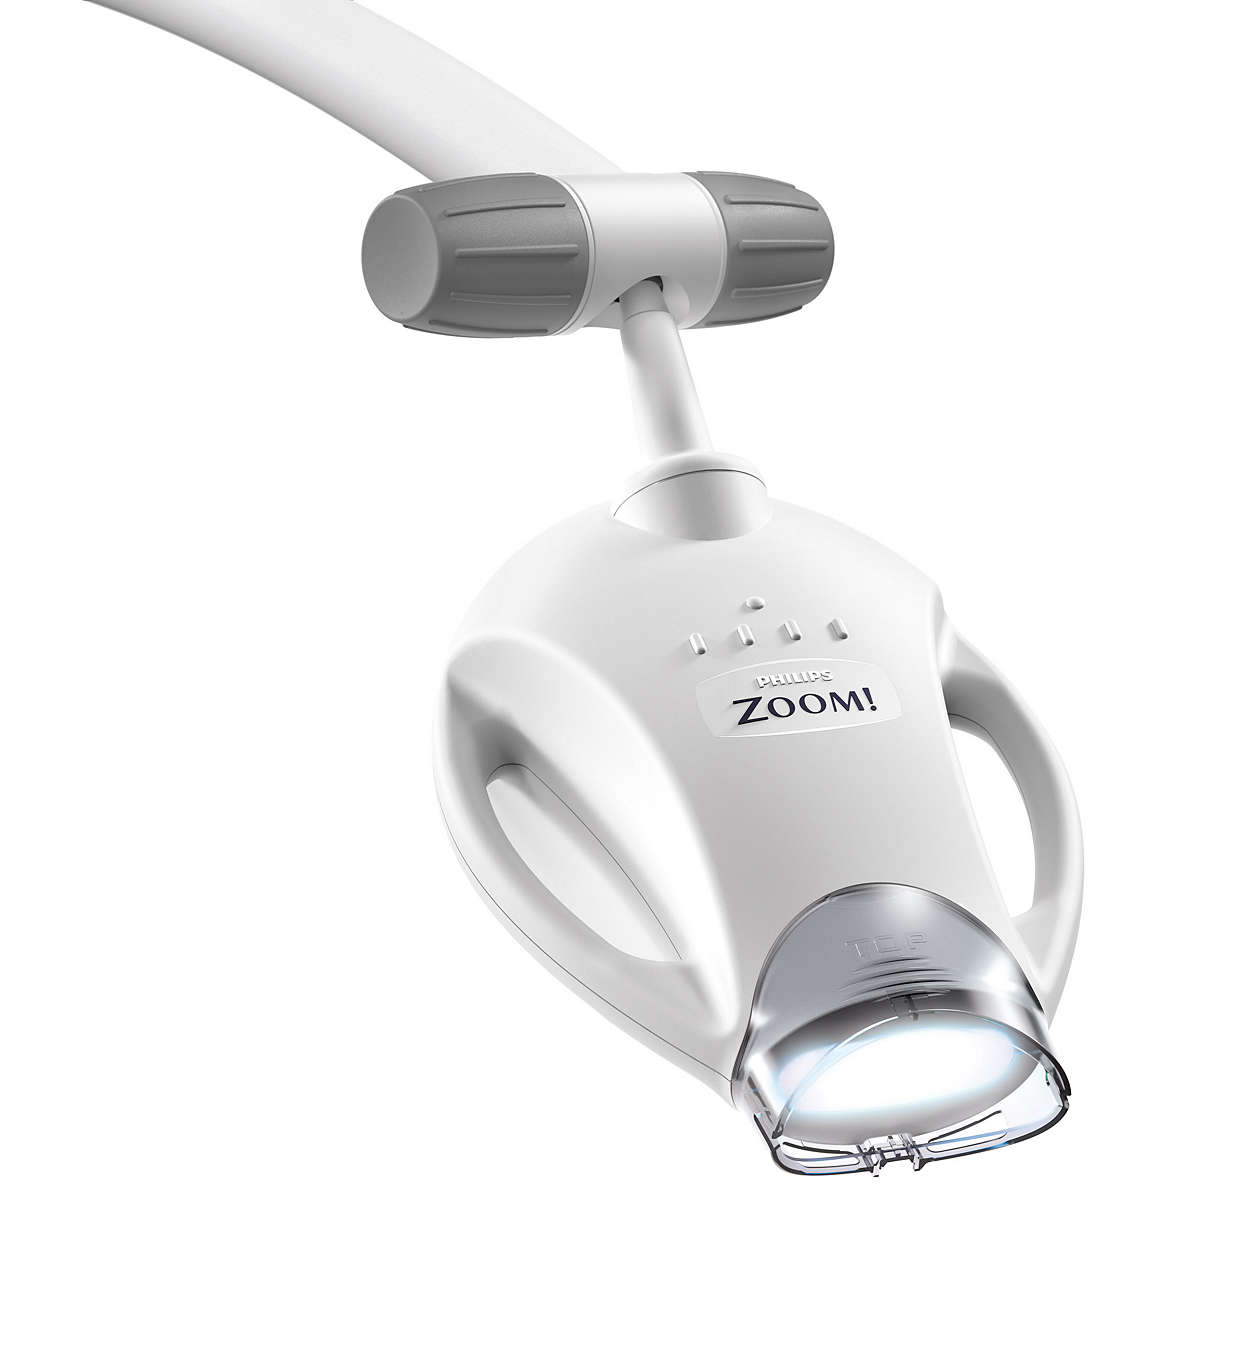 Philips Zoom light stand.